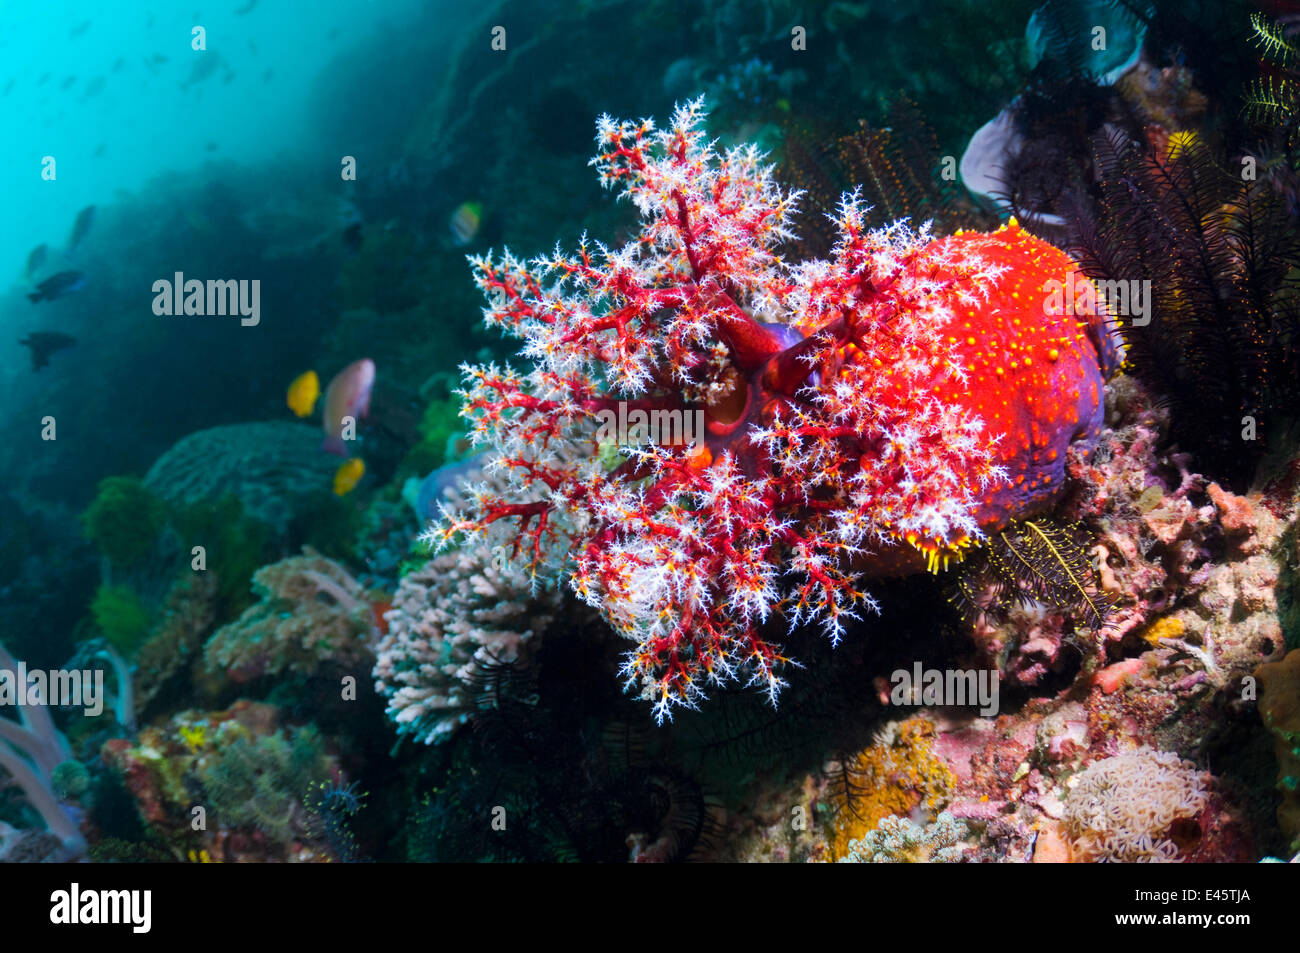 Sea apple (Pseudocolochirus violaceus), a sea cucumber, feeds by filtering the water column with its tentacular crown, successively bringing each arm into its mouth to deliver food particles. Komodo National Park, Indonesia. Stock Photo